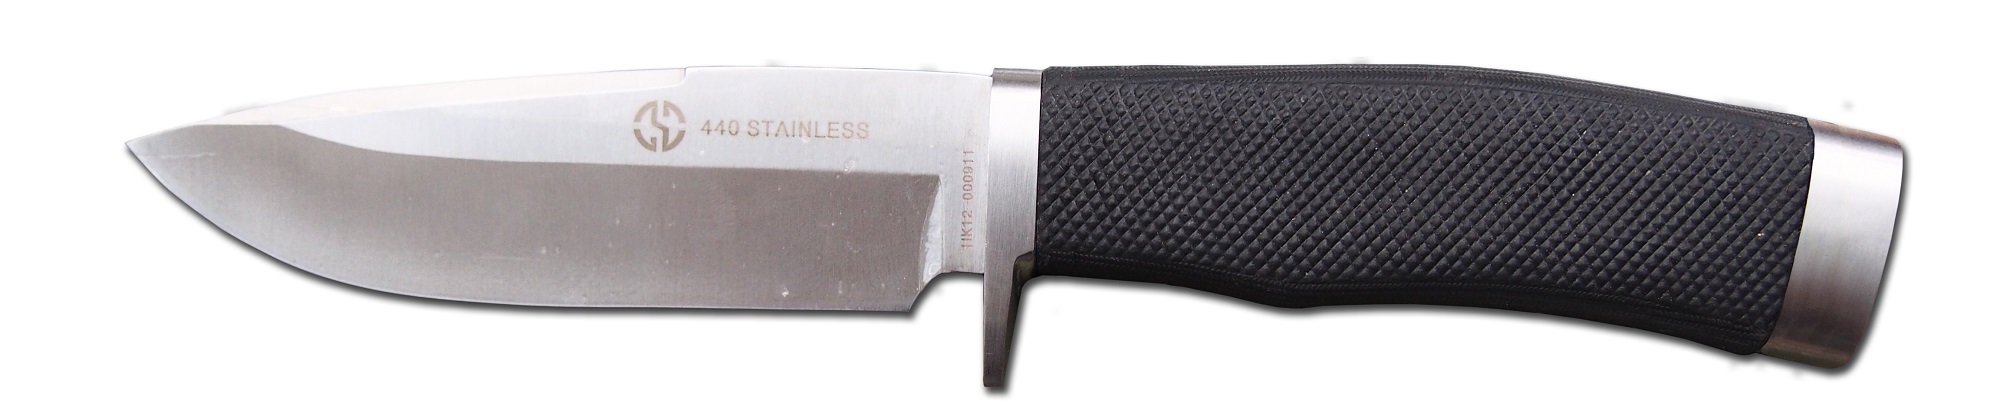 Outdoor knife